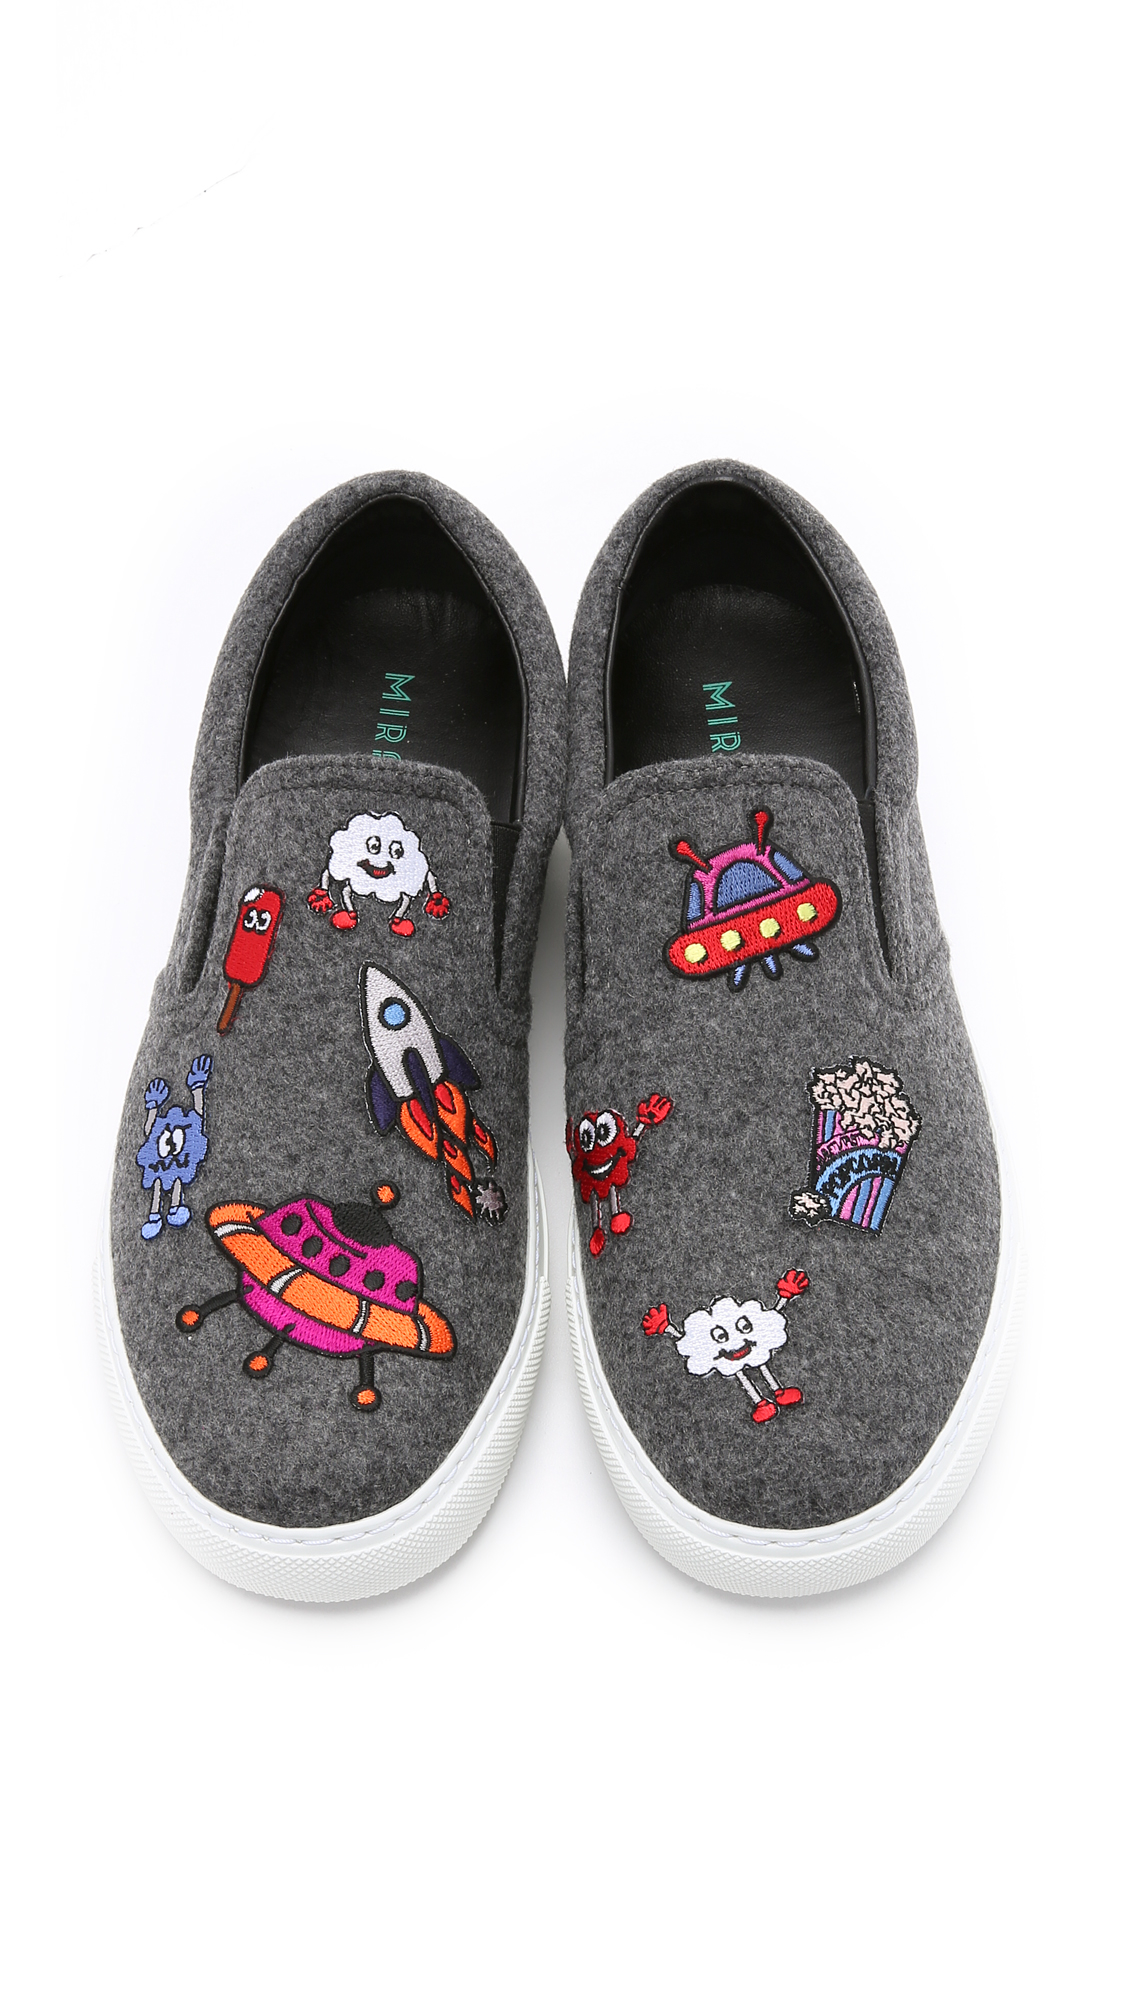 Lyst - Mira Mikati Allover Icons Patched Slip On Sneakers - Grey in Gray